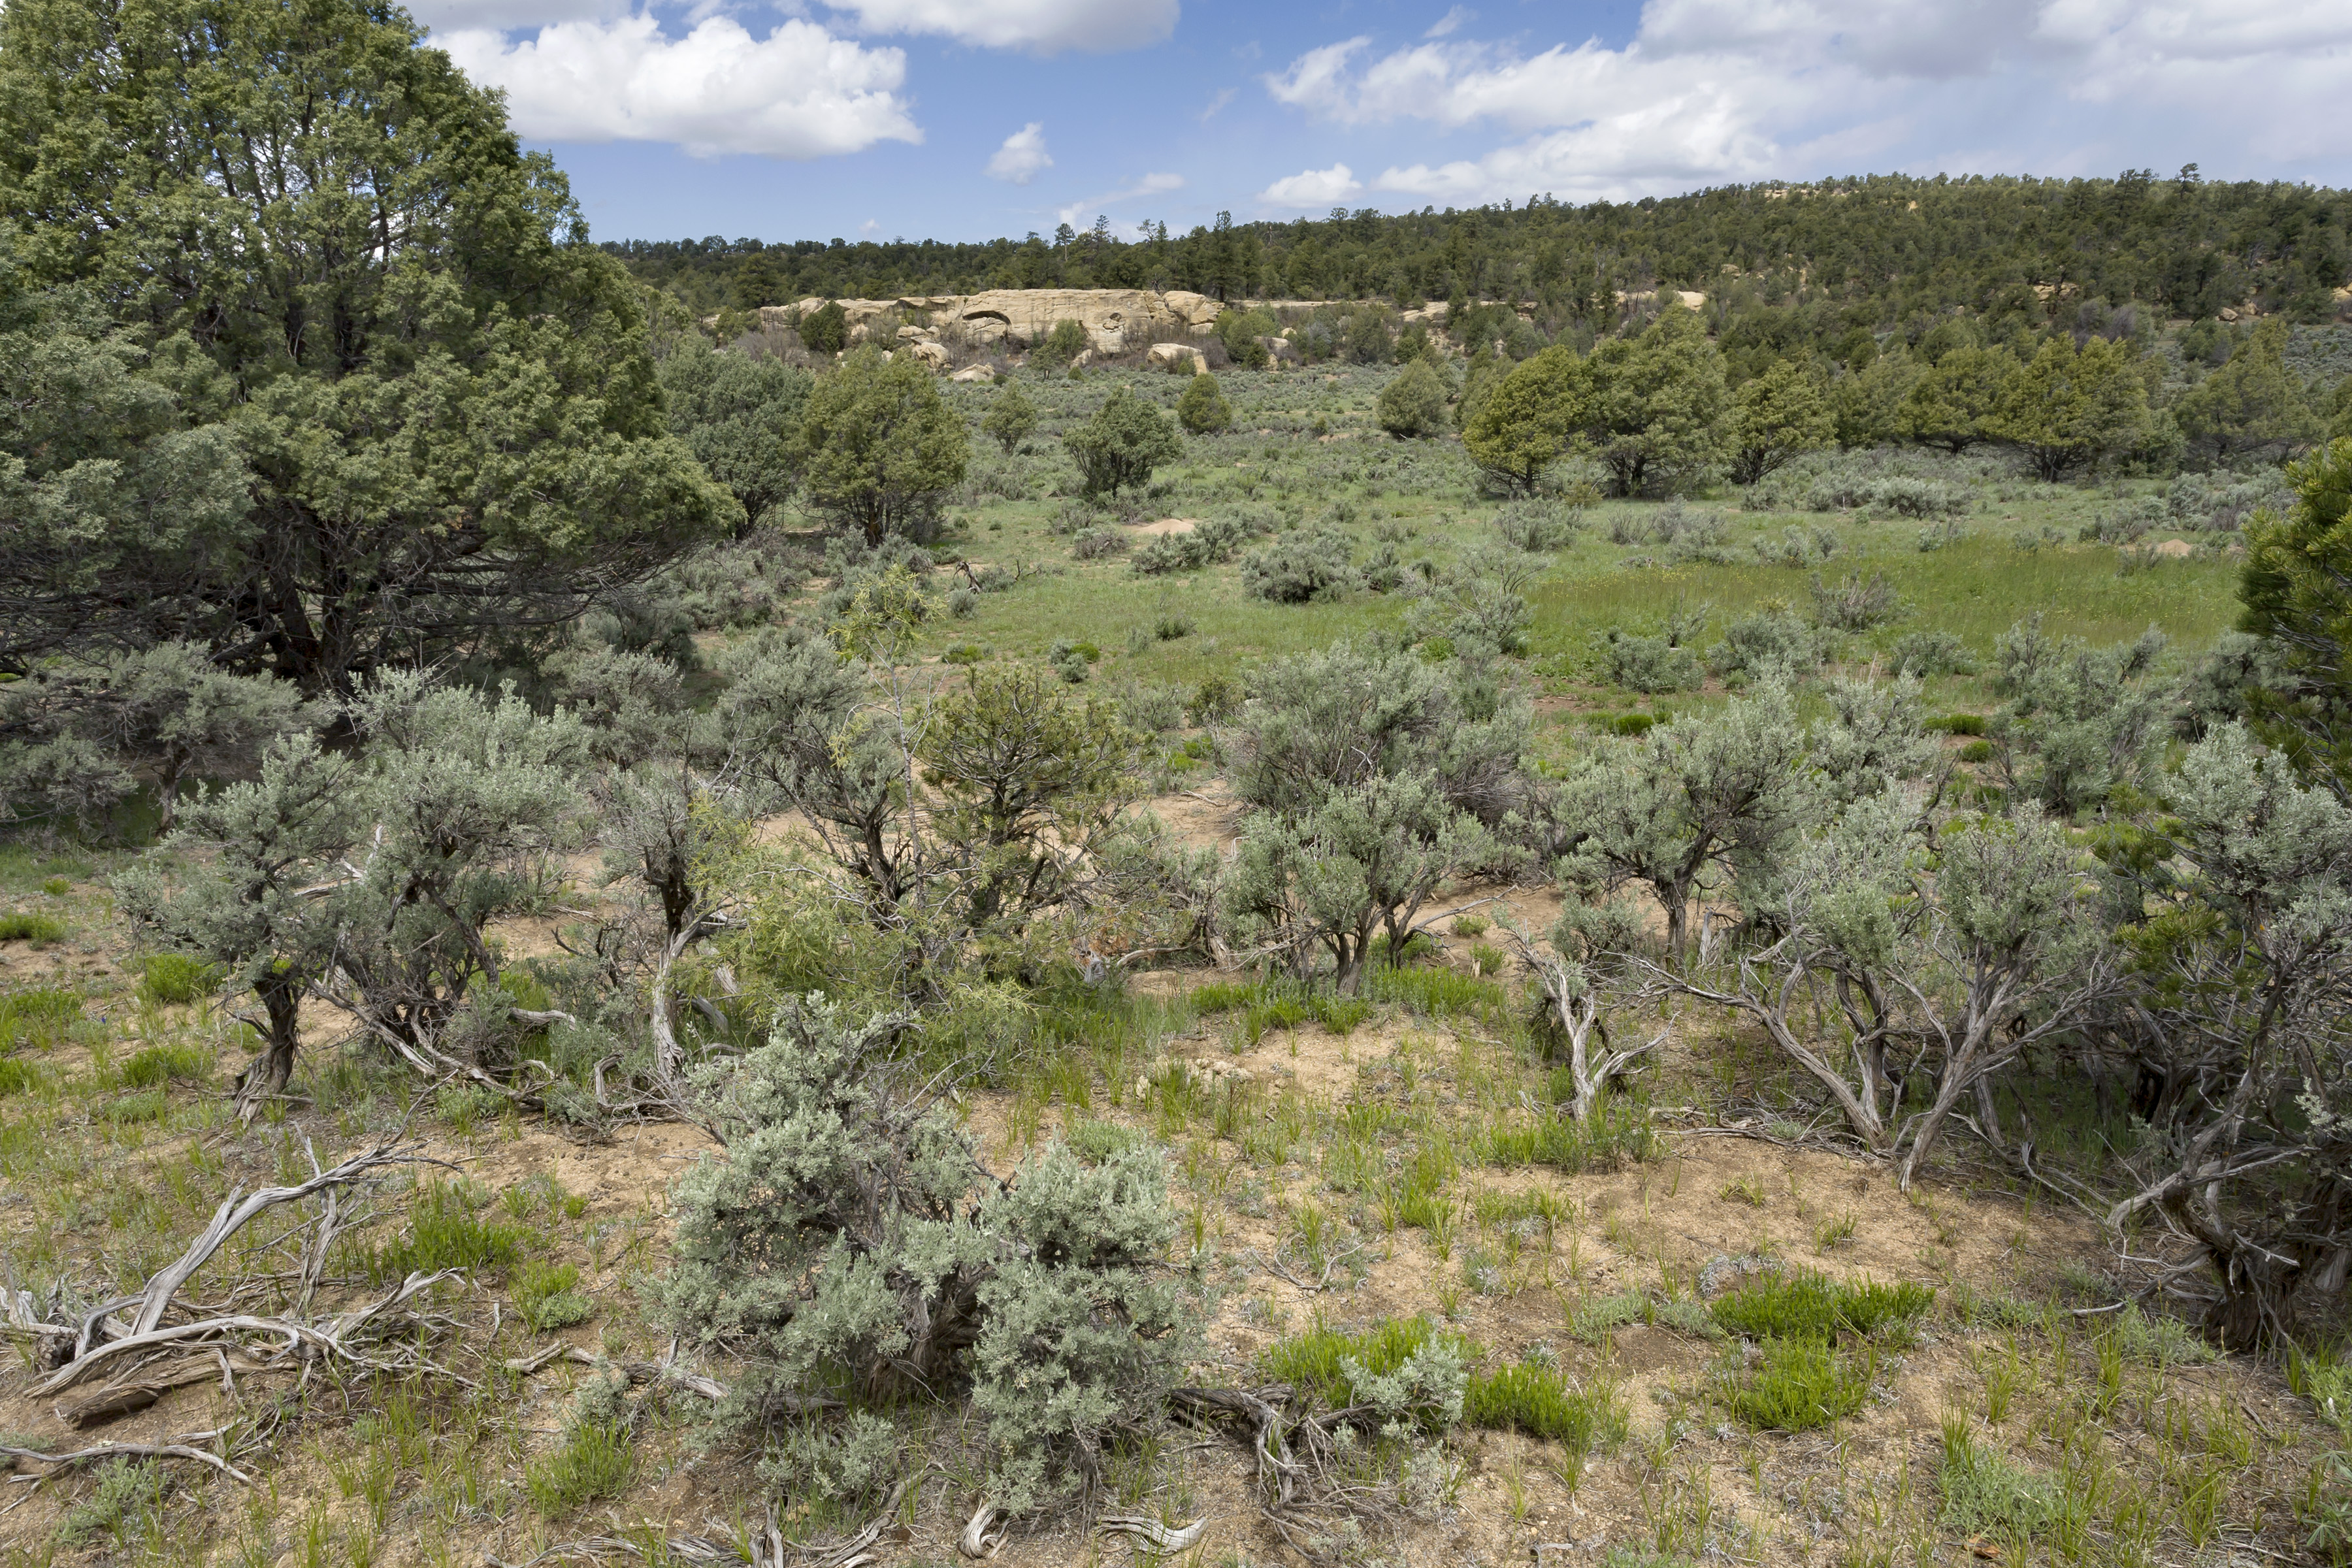 Example brushland habitat showing sagebrushes in situ with grasses and some trees